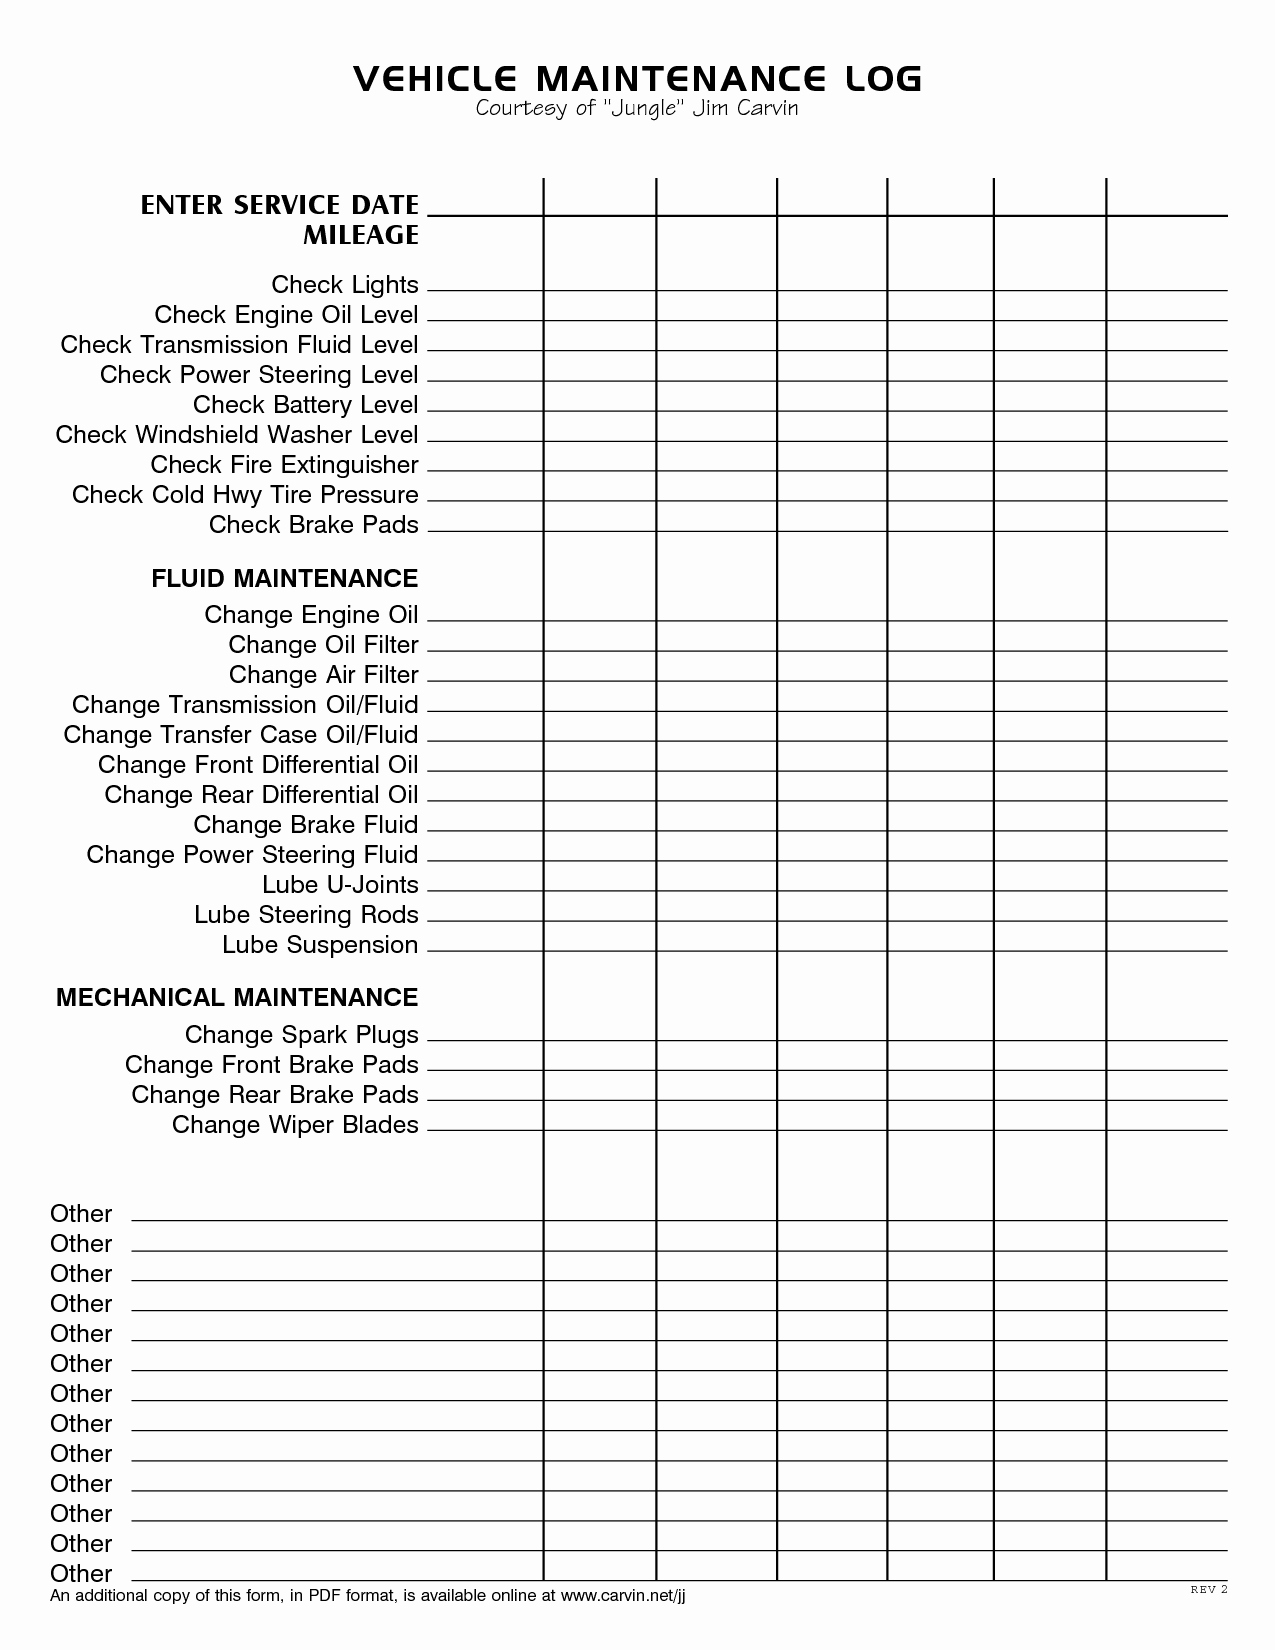 Car Maintenance Schedule Template Awesome Vehicle Maintenance Log Book Template